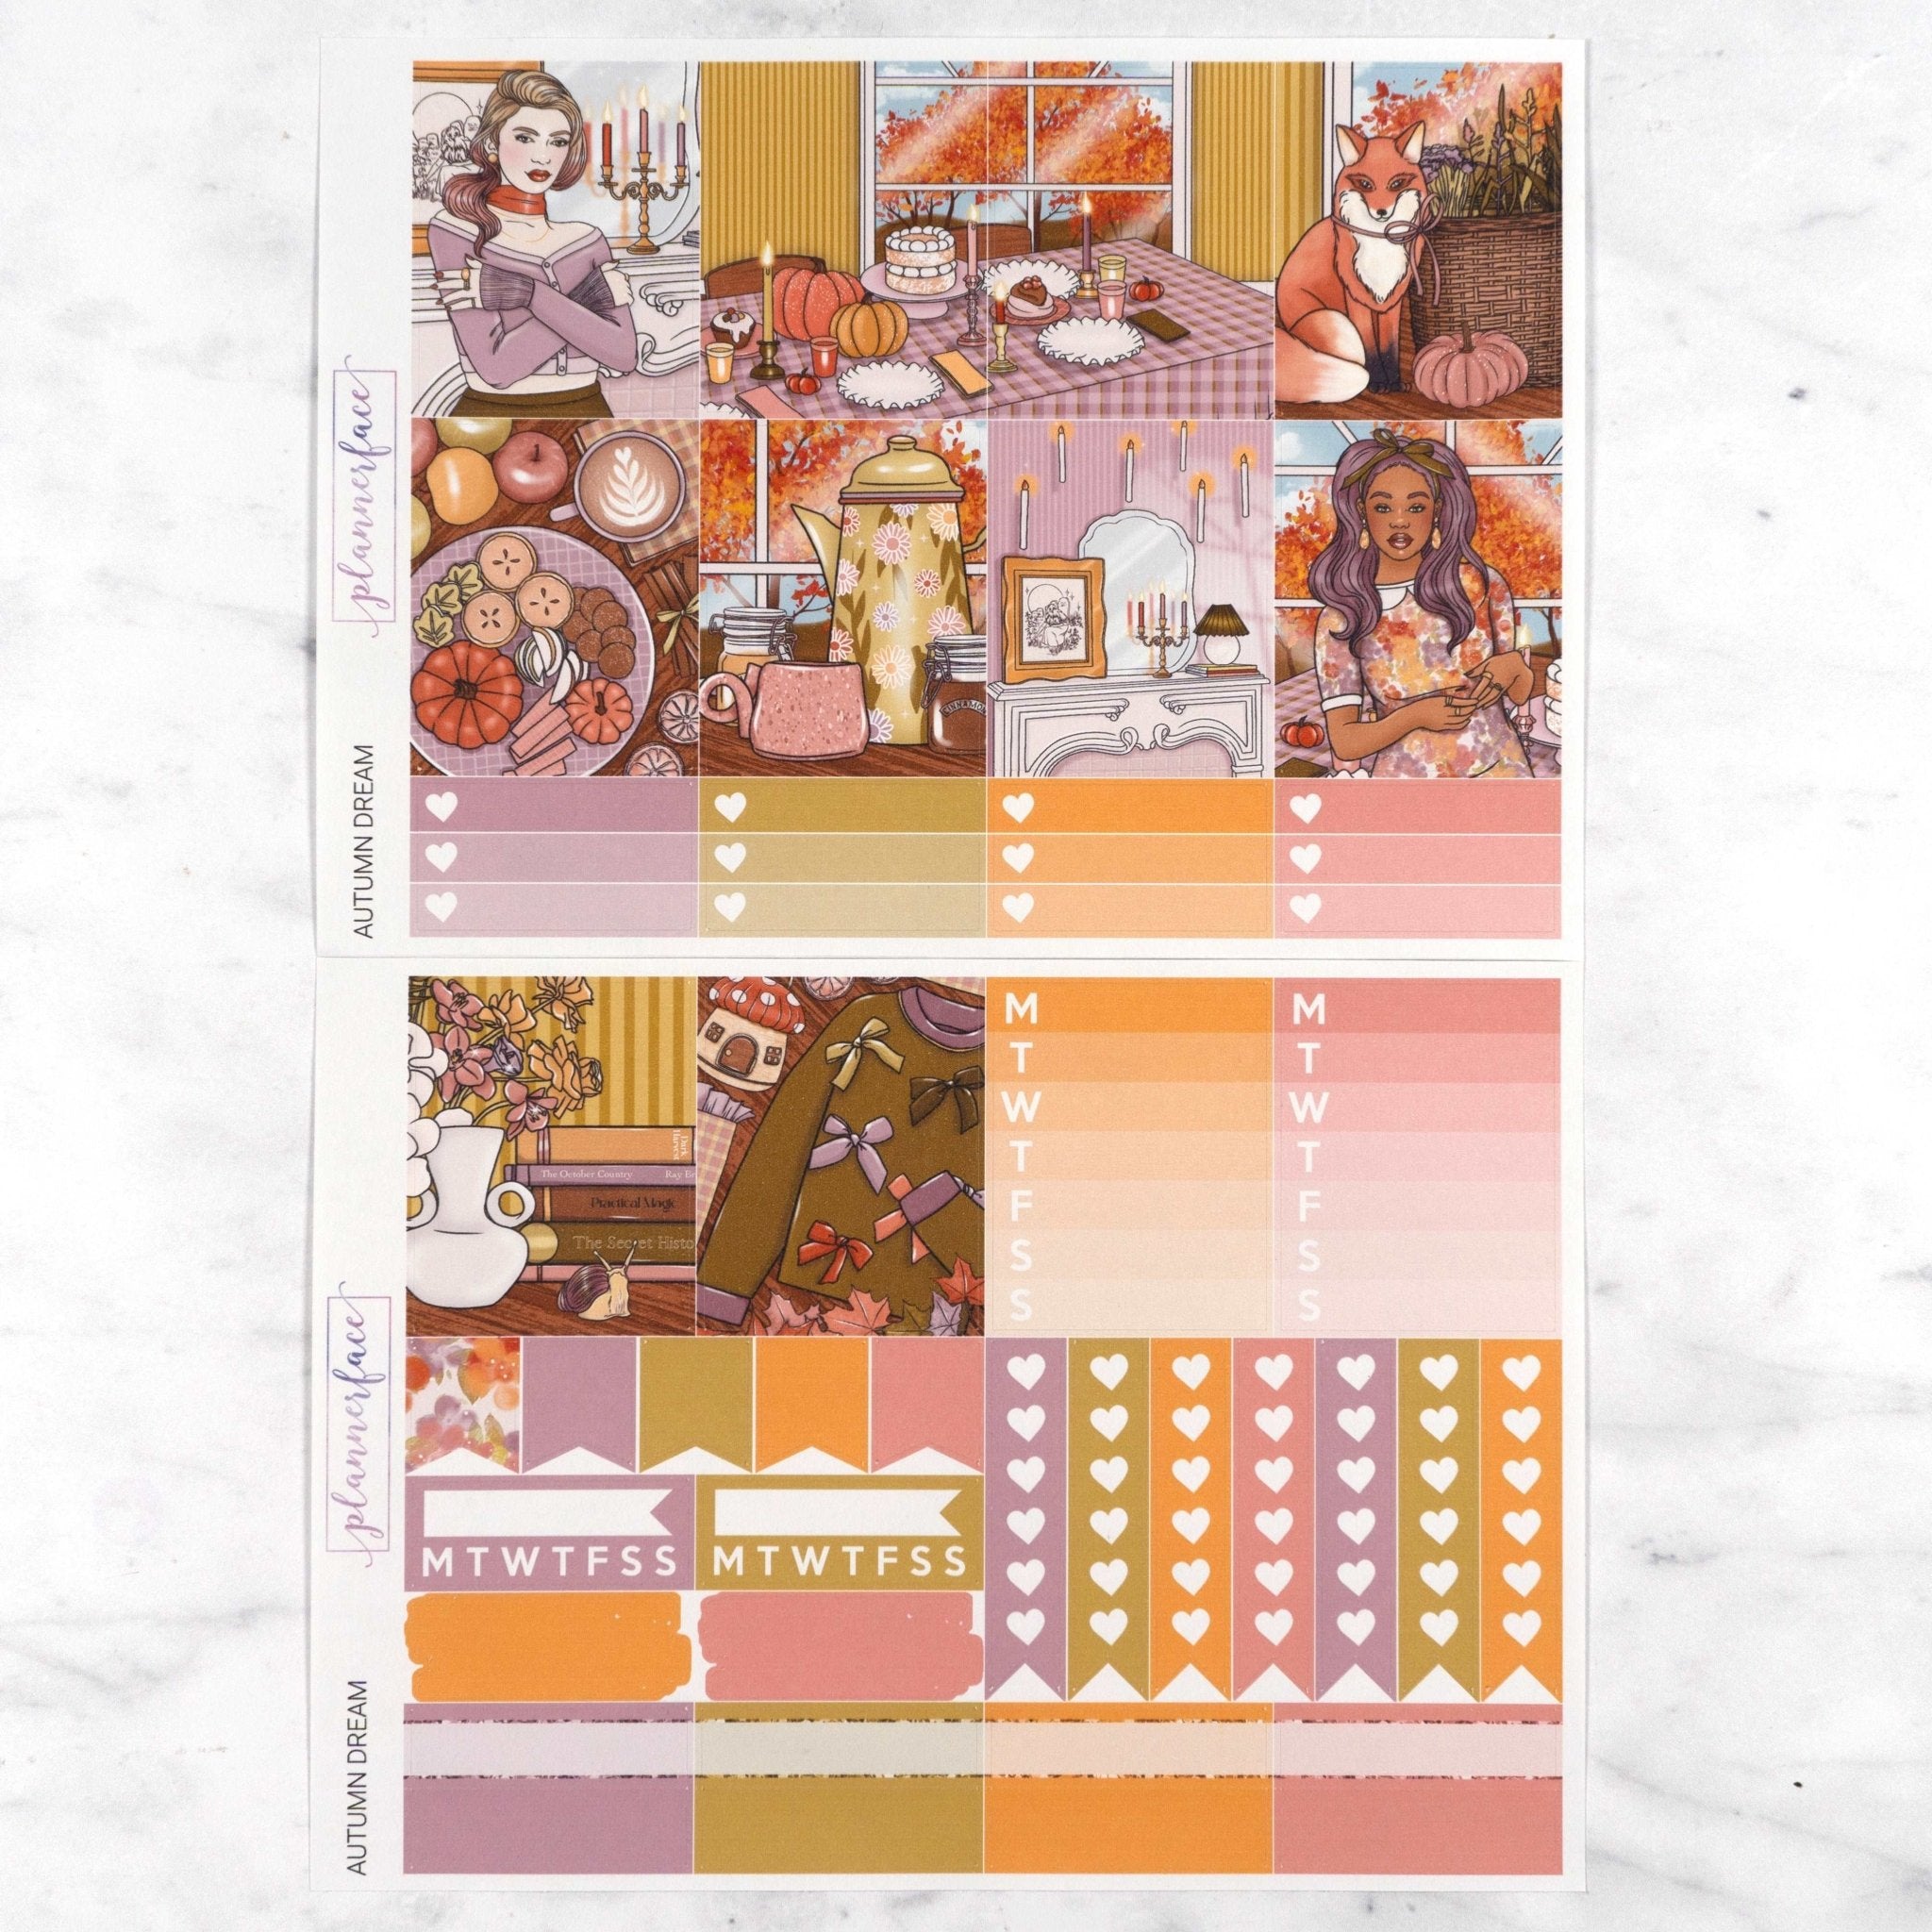 Autumn Dream Weekly Kit by Plannerface